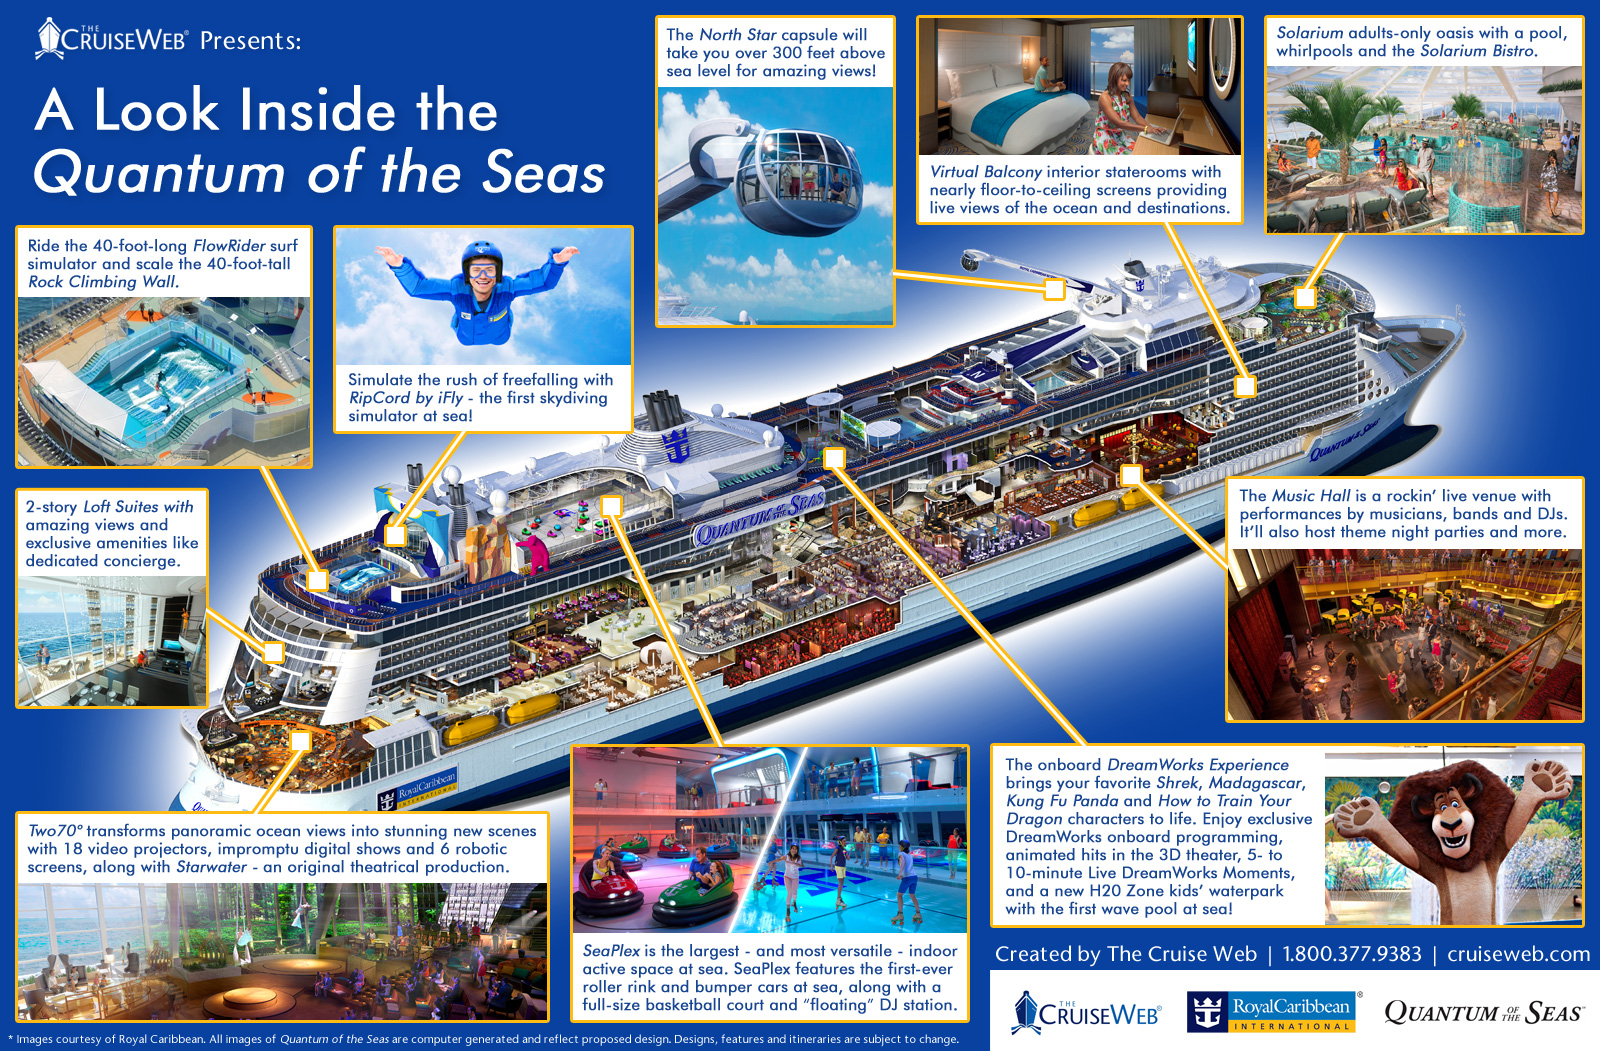 Royal Caribbean's Quantum of the Seas Cruise Ship, 2019, 2020 and 2021